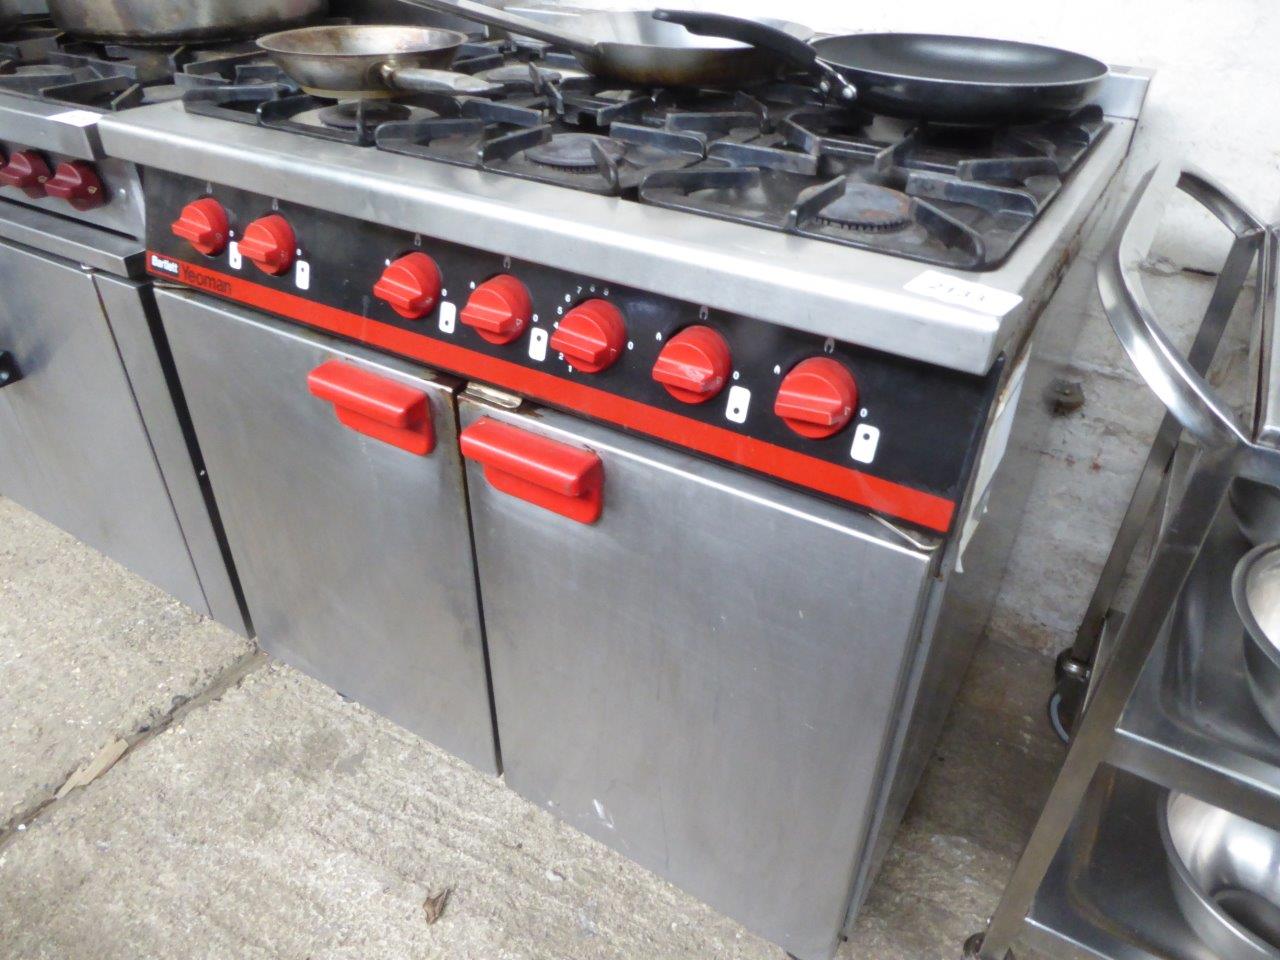 Bartlett Yeoman 6 ring gas cooker with oven.